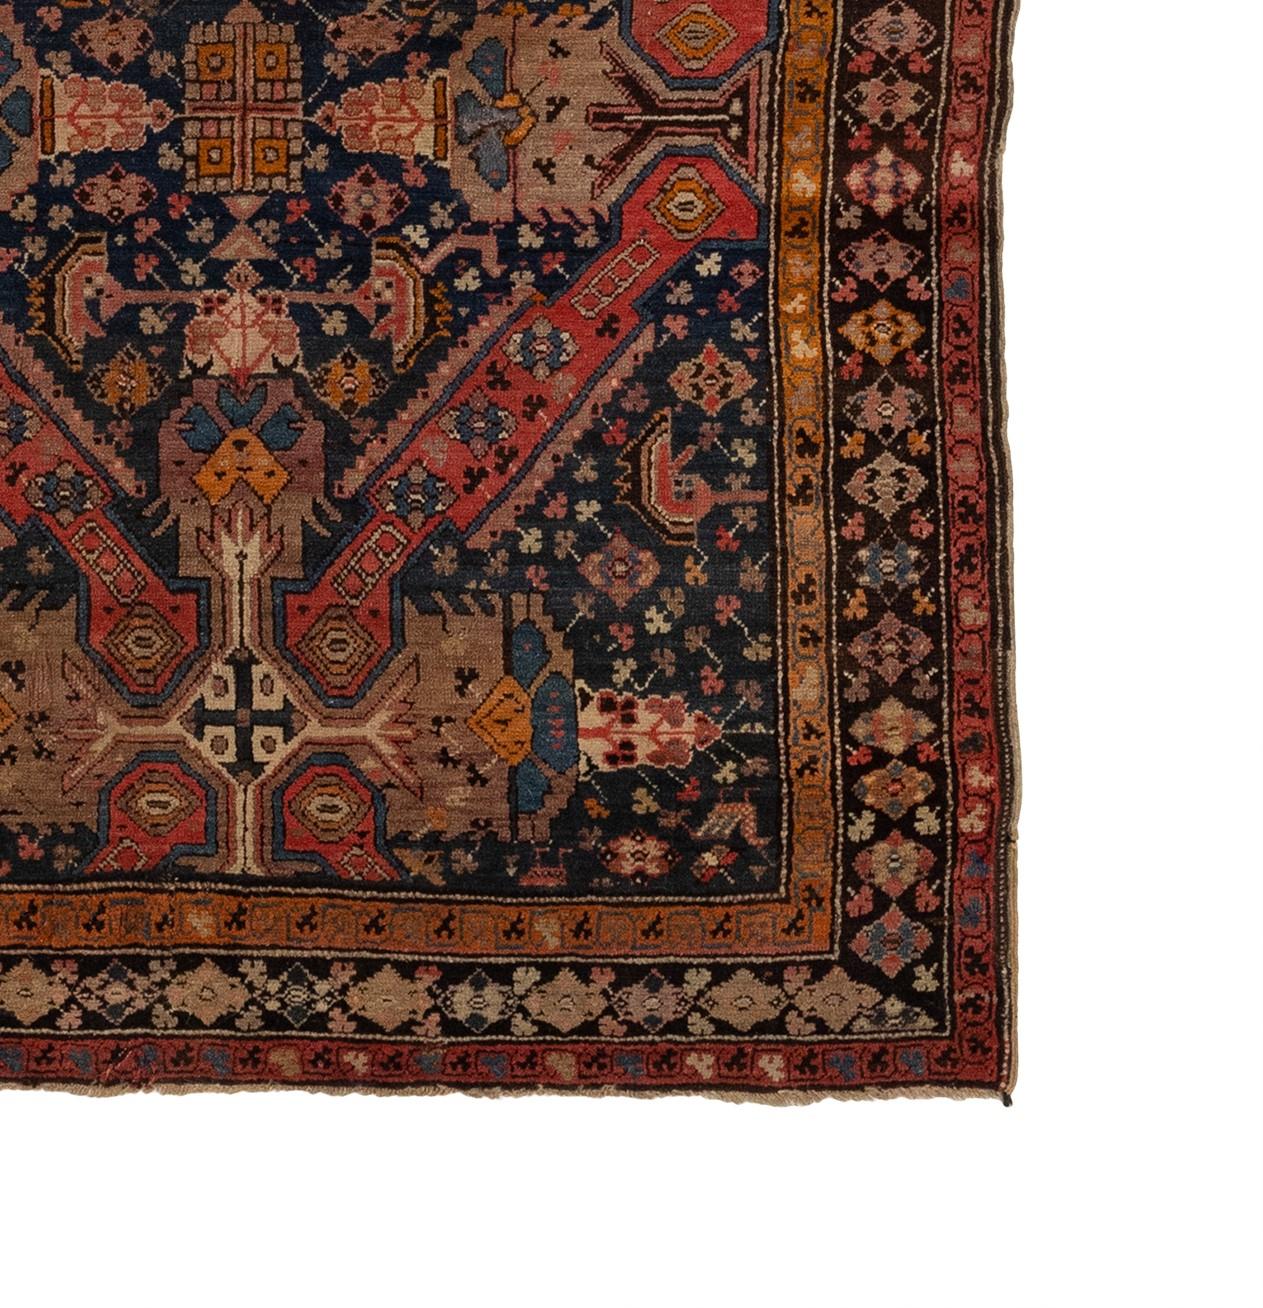 This antique Caucasian rug from the 1880s features a breathtaking dragon design. The intricate patterns and flawless craftsmanship showcase the incredible talent and creativity that went into its creation. Its timeless elegance and exquisite design